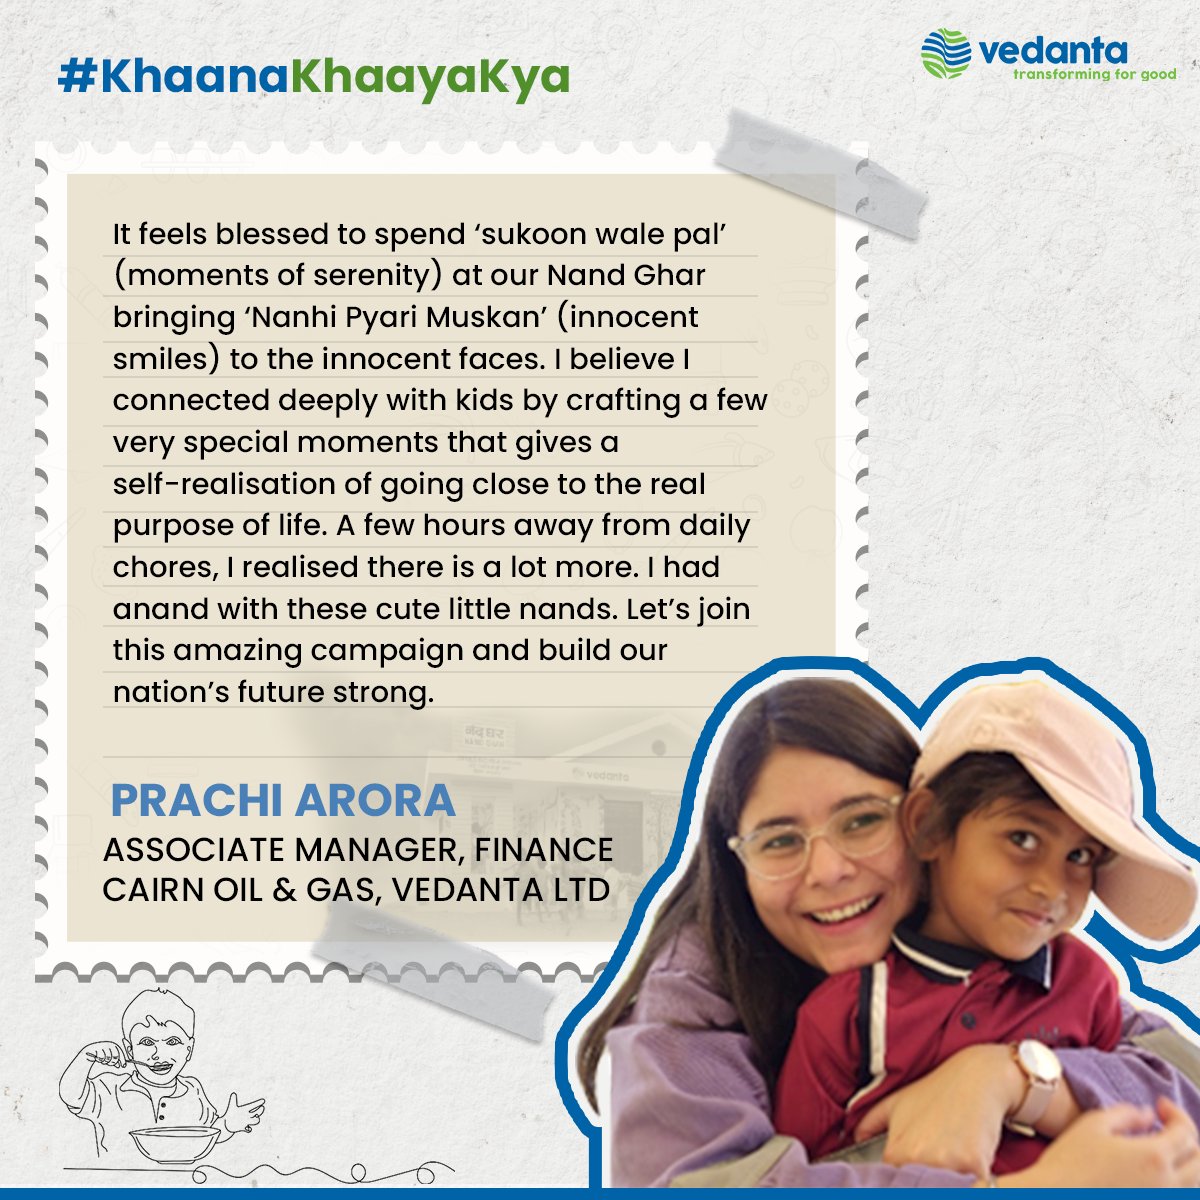 Every #KhaanaKhaayaKya carries the hope of a brighter tomorrow! Swipe on◀️to read touching stories from our #Vedanta family, sharing the joy of asking this question and the smiles it brings to children at our Nand Ghars. Click here to make your donation: bit.ly/4bRMaIx